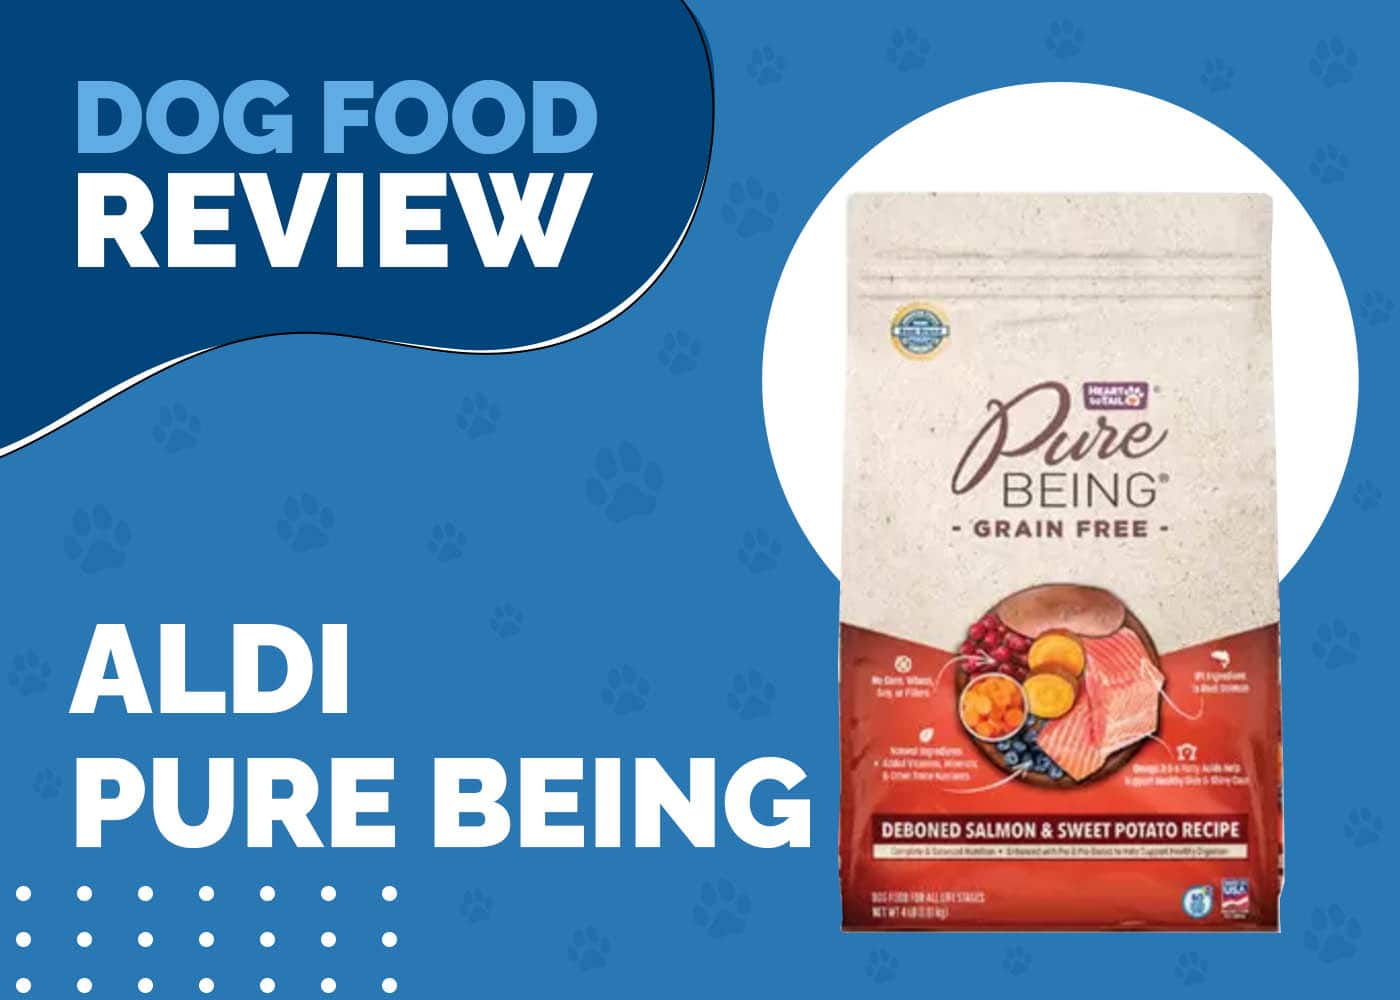 Aldi Pure Being Dog Food Review